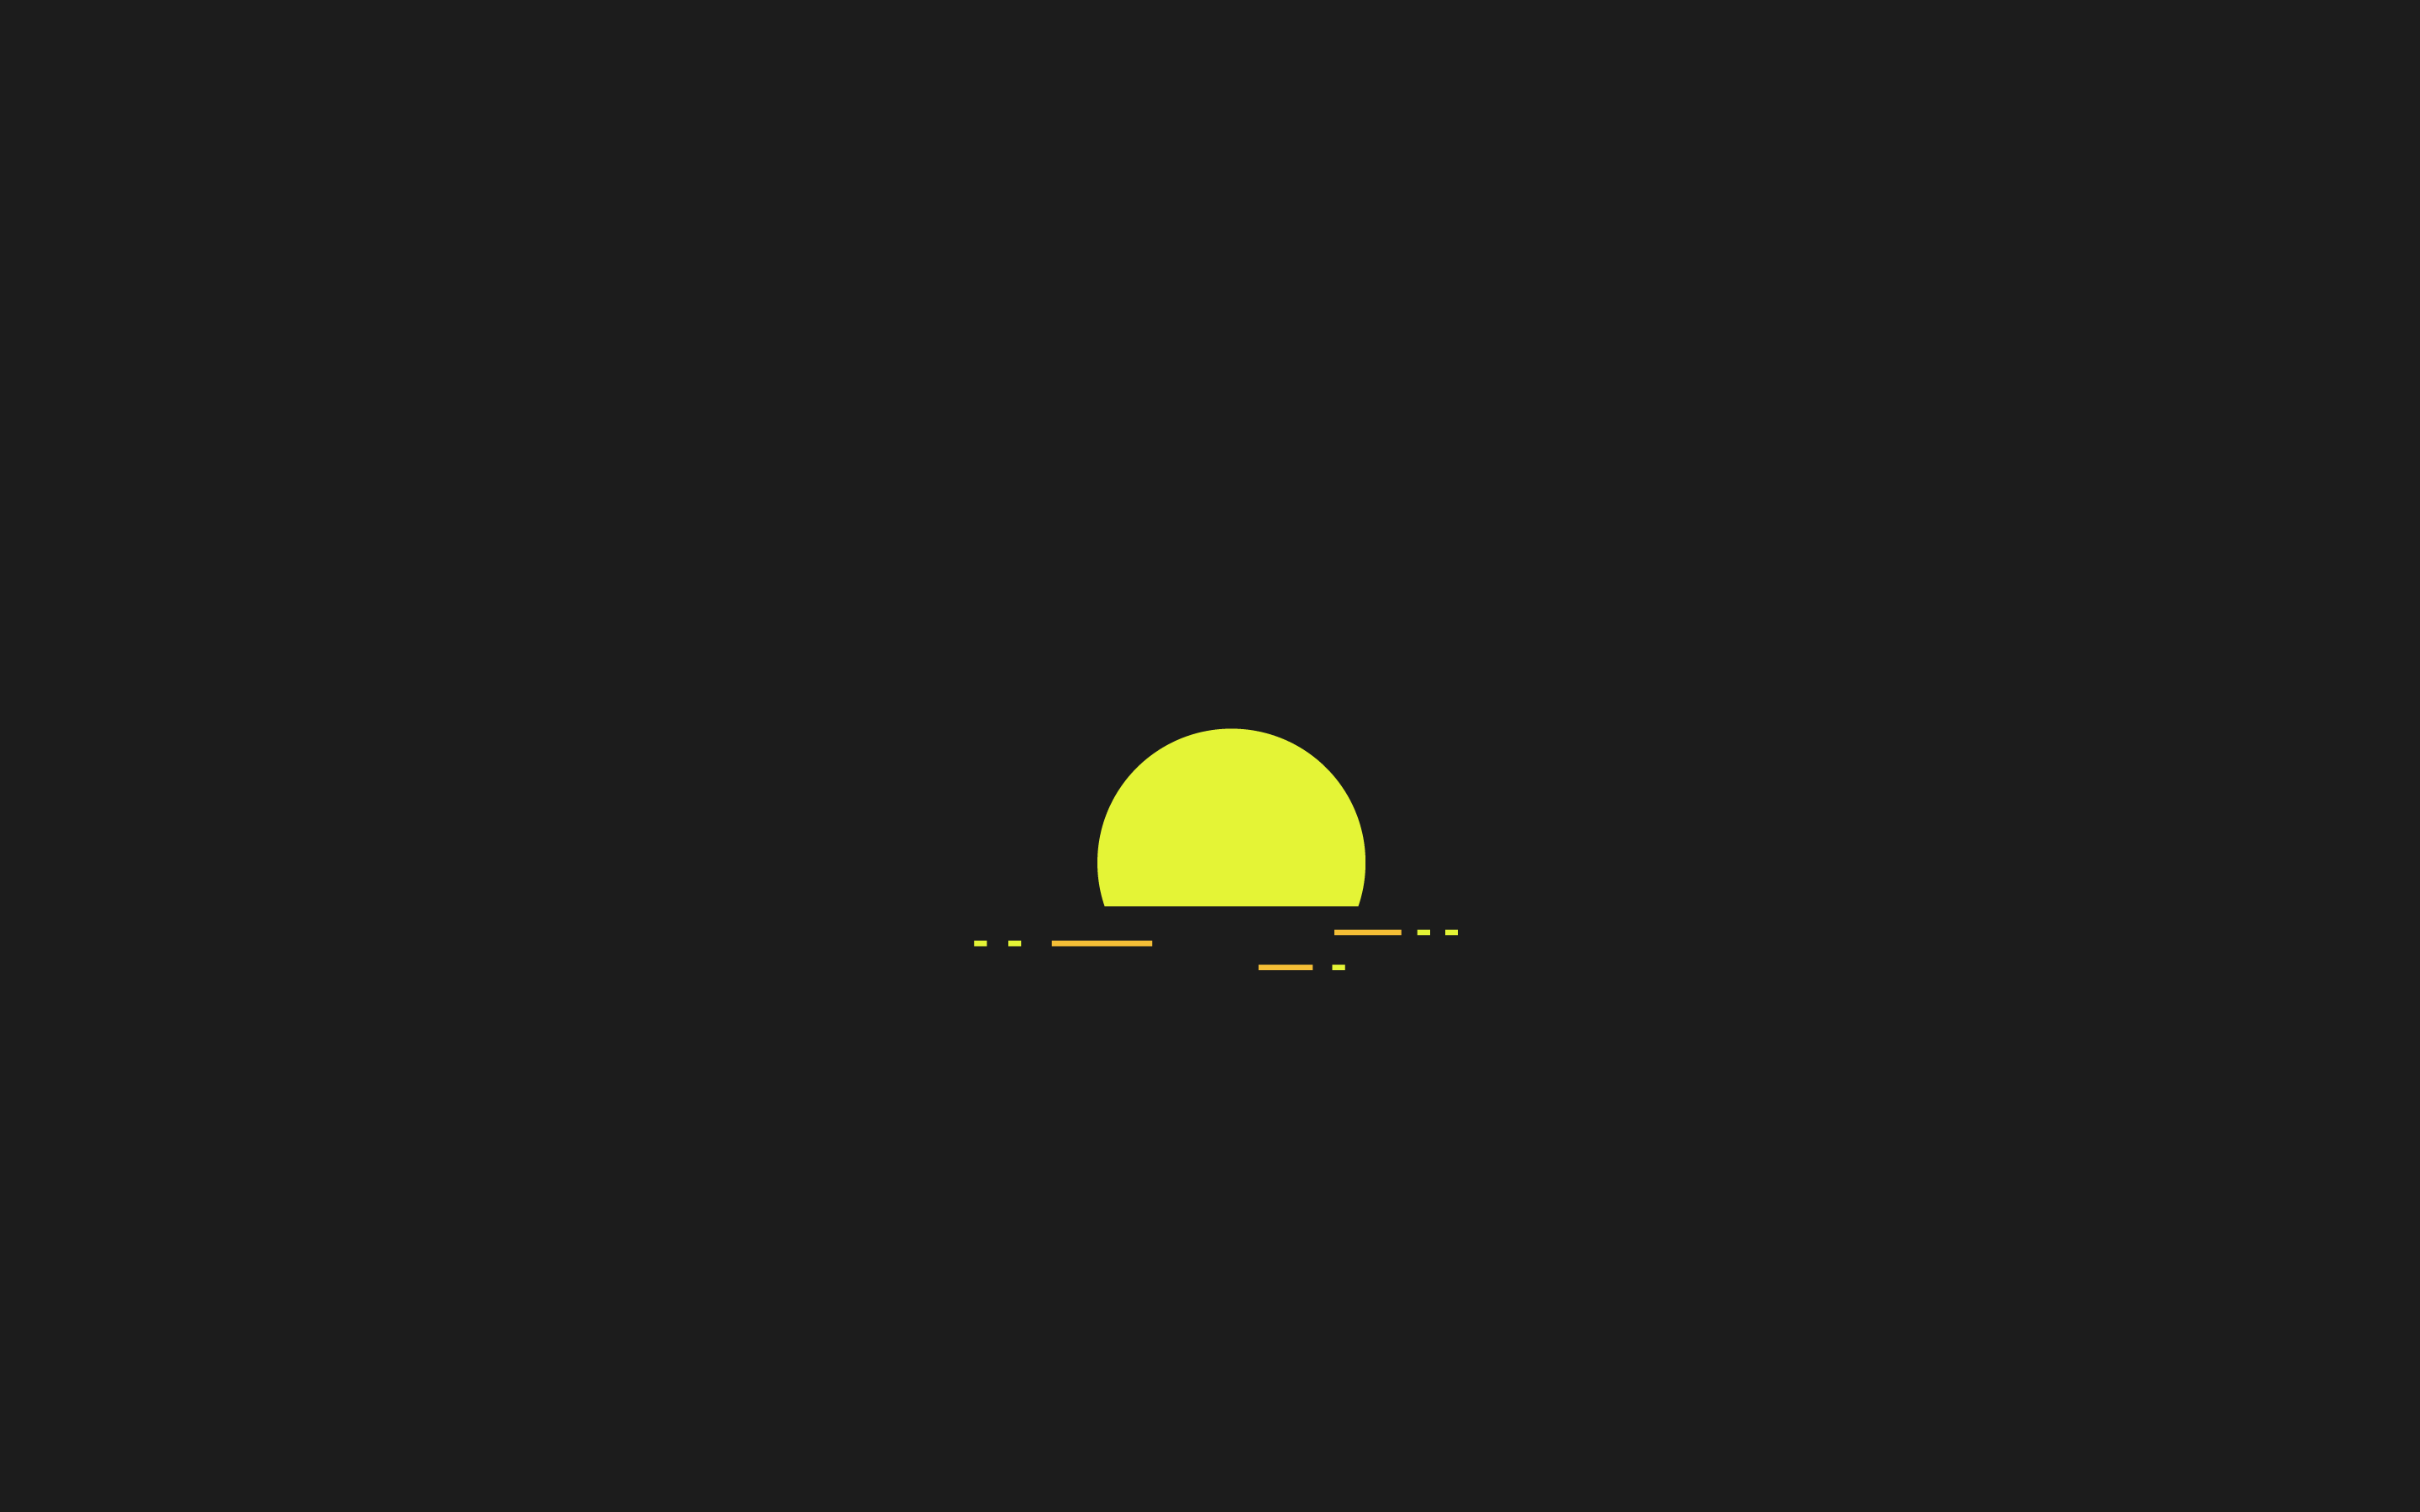 1100+] Simple Wallpapers | Wallpapers.com